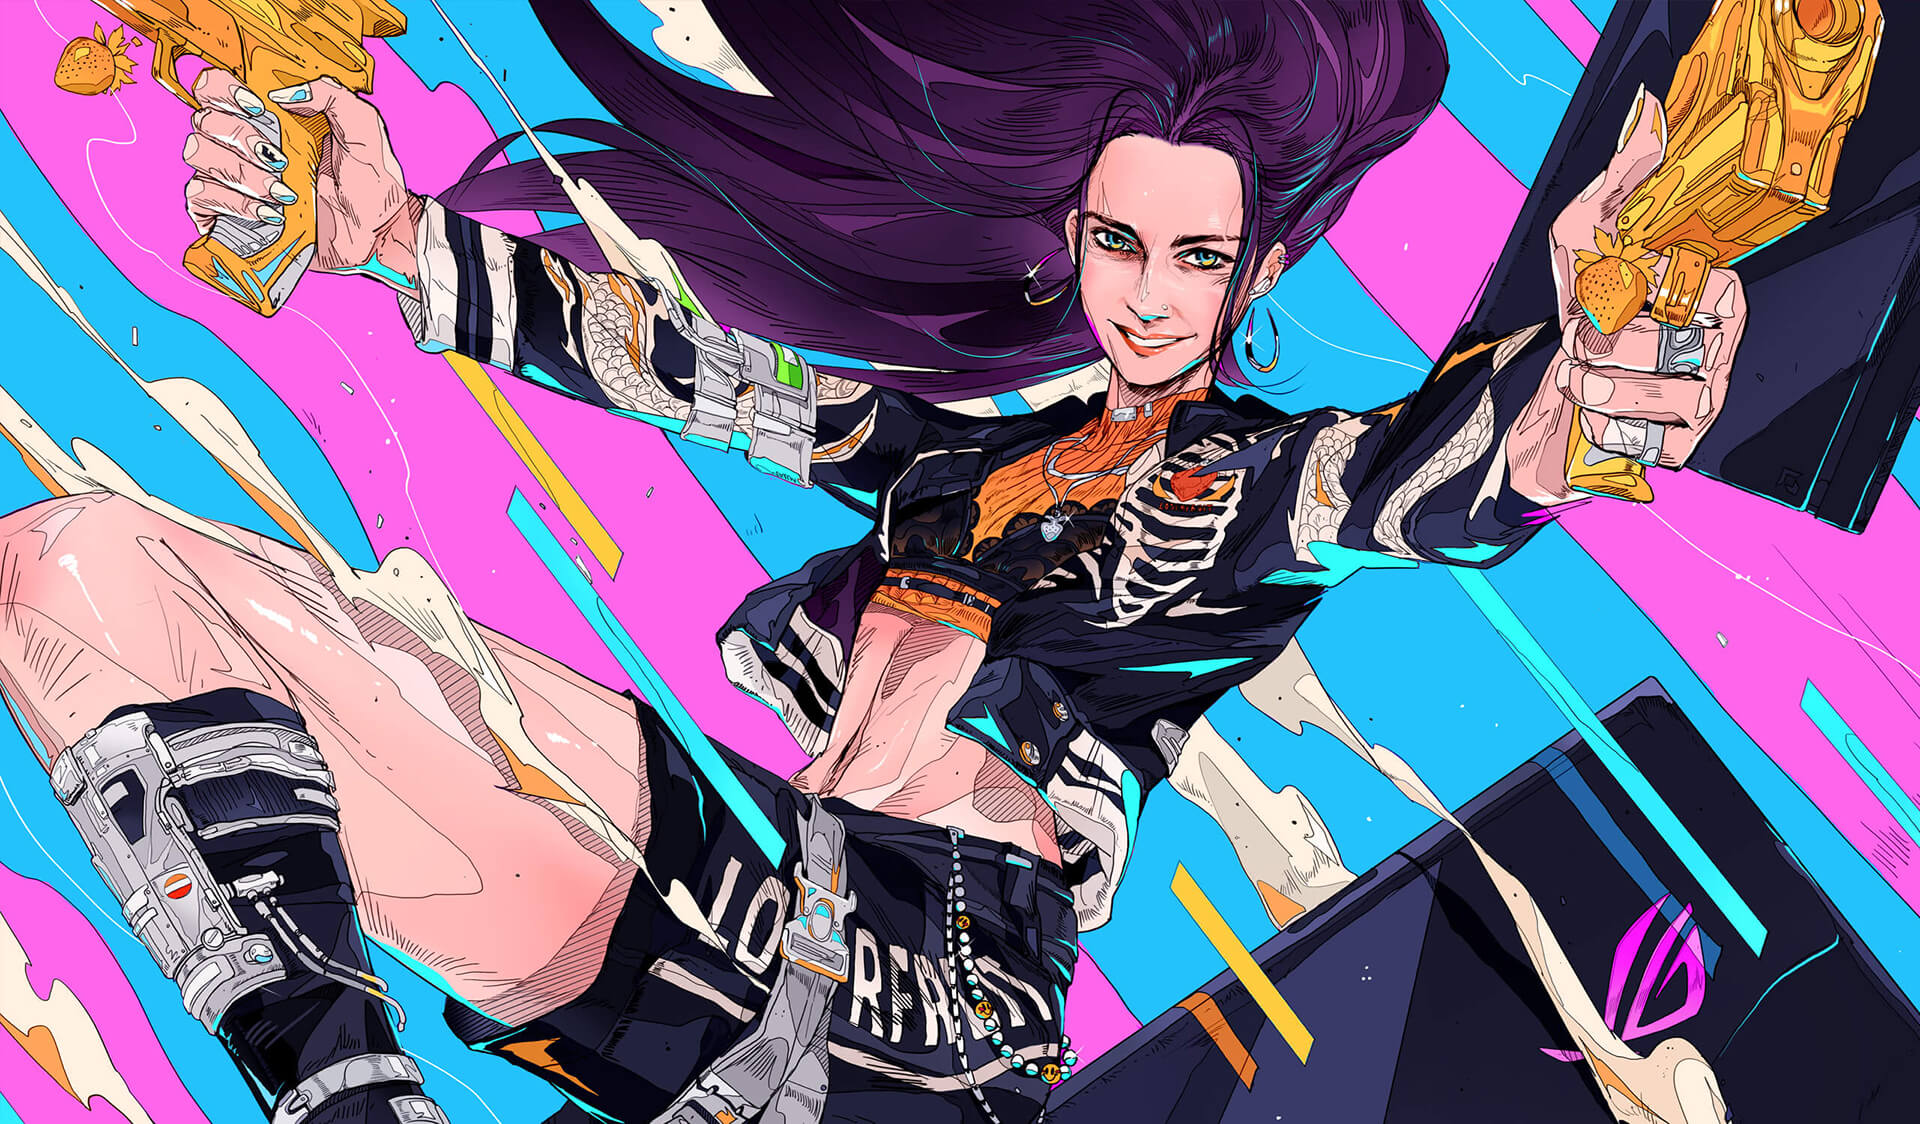 Instagram Profile Picture Anime Cyberpunk Twitch (Download Now) 